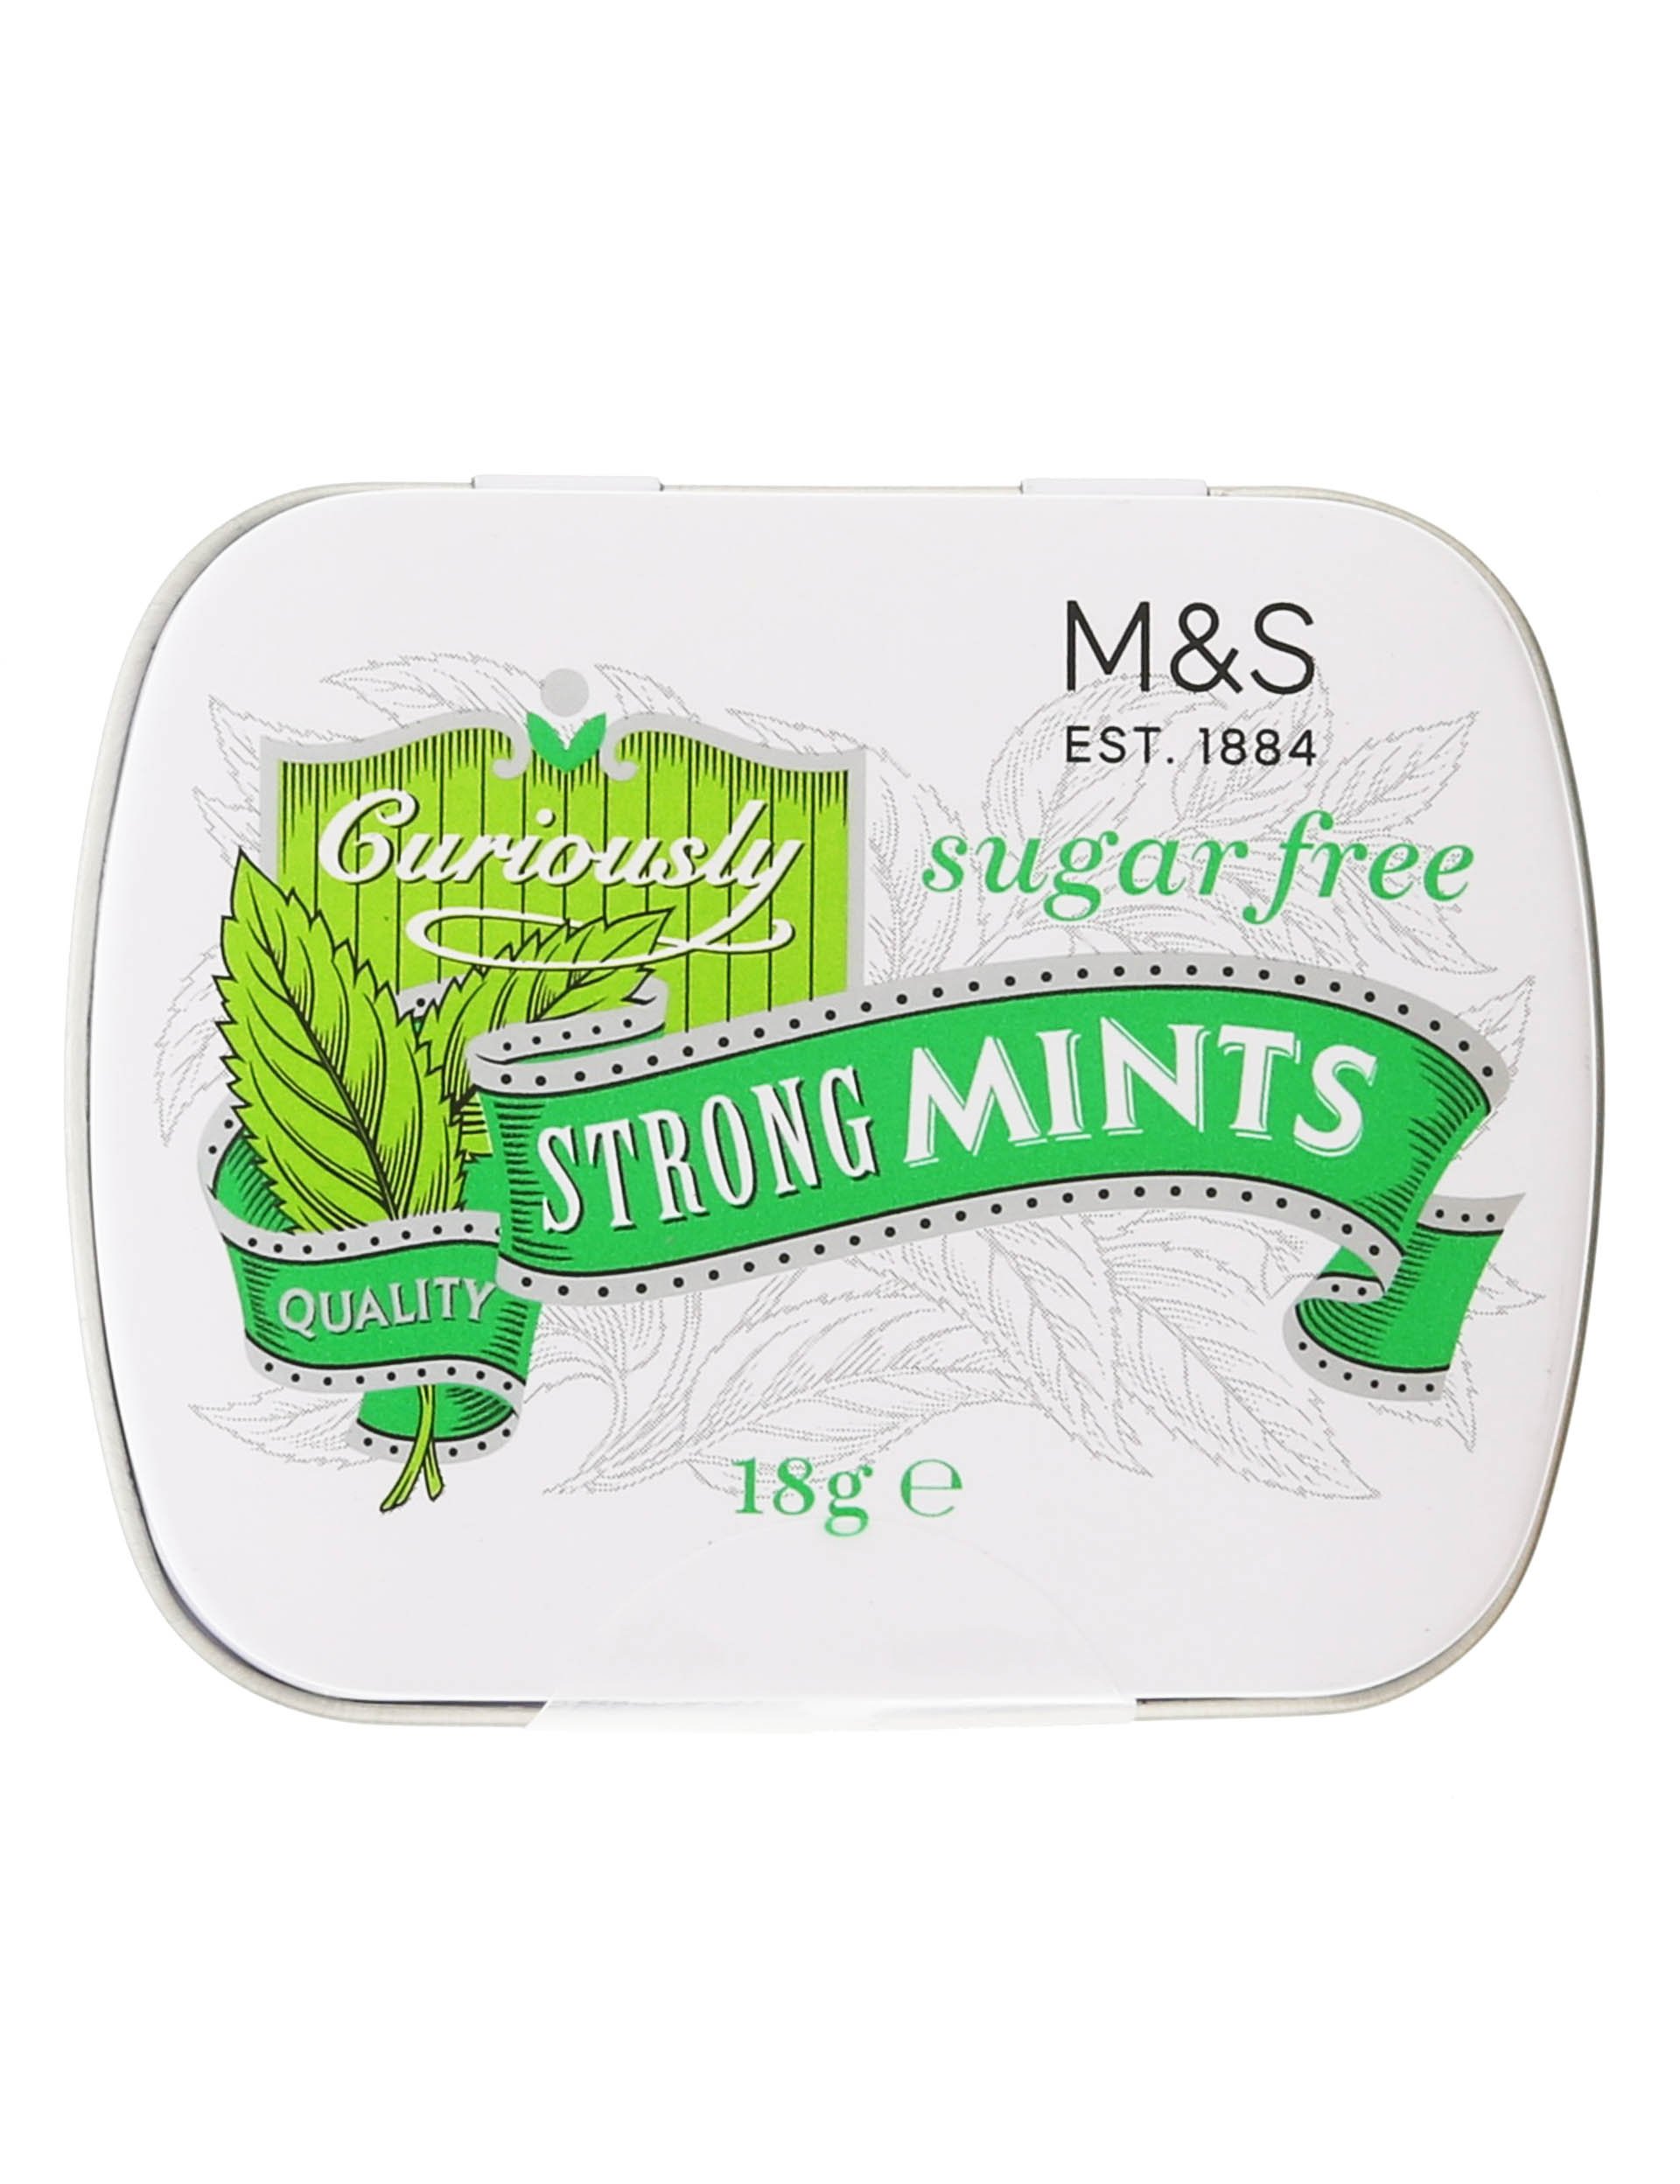 Curiously Strong Mint Rolls - Marks & Spencer Cyprus